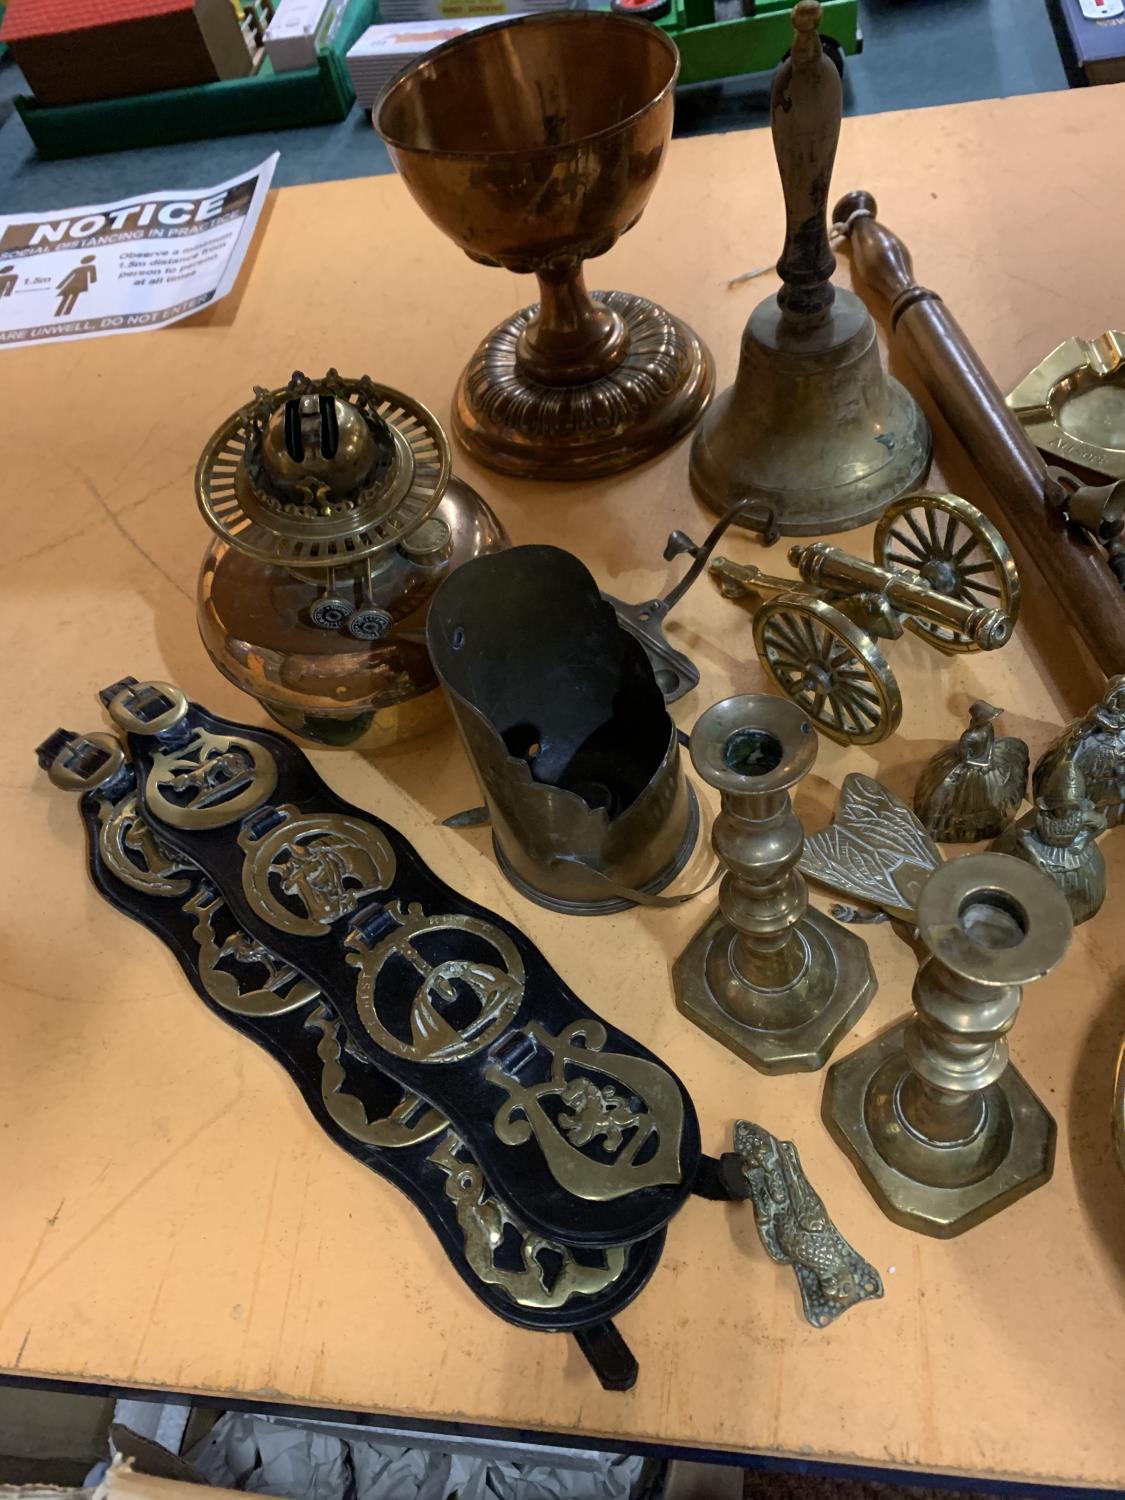 A LARGE QUANTITY OF BRASSWARE TO INCLUDE A BELL, HORSE BRASSES, KETTLE, CANDLESTICKS, CANNON, LAMP - Image 11 of 12